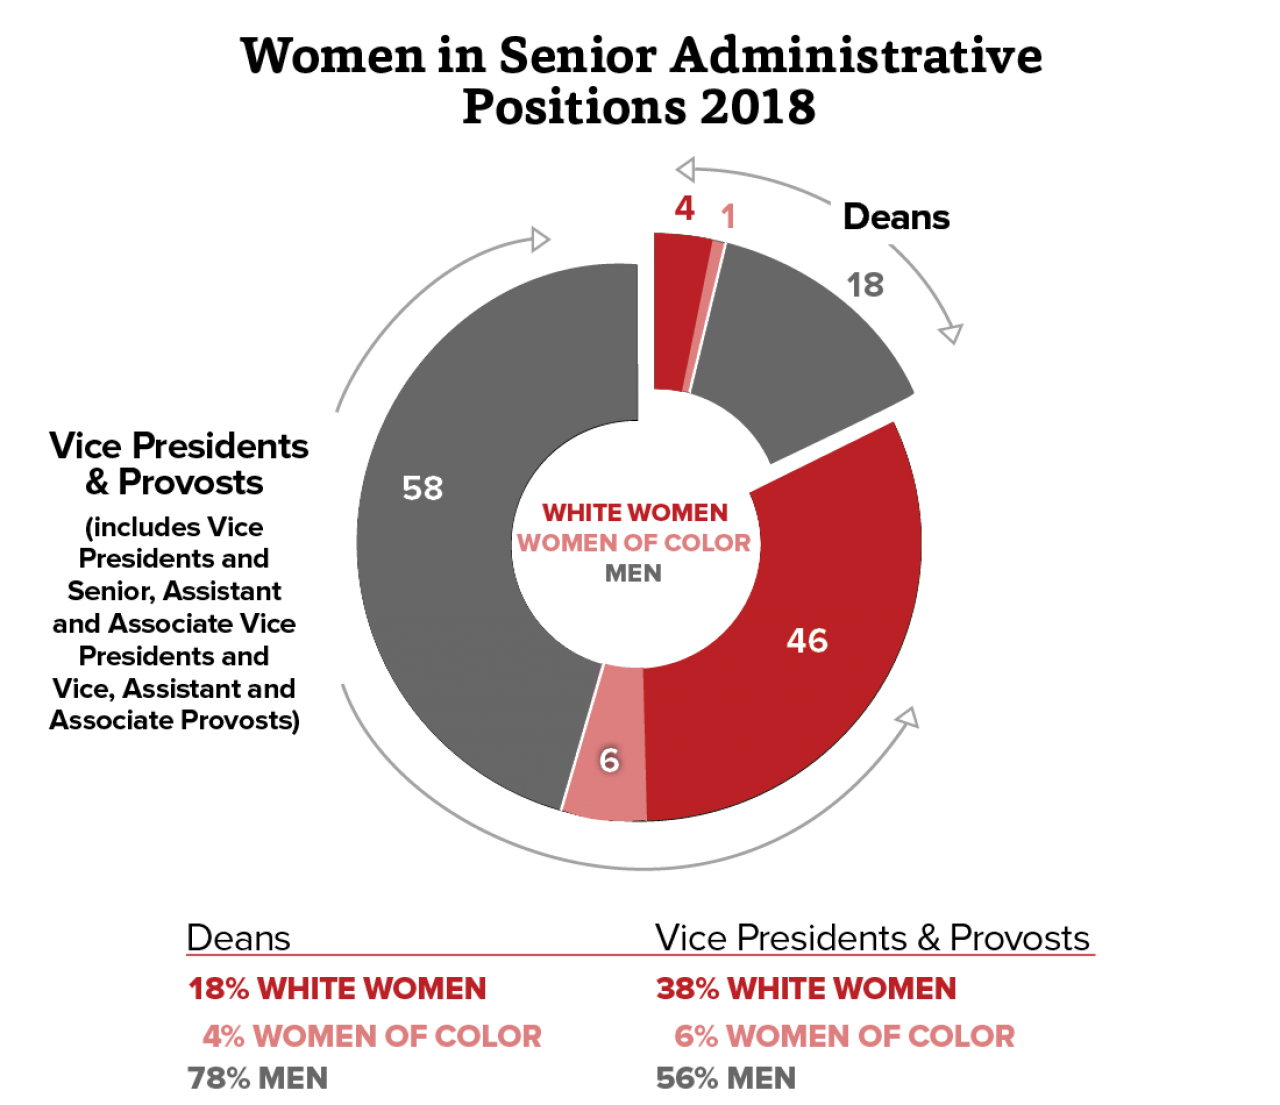 Women in Senior Administrative Positions 2018 graphic